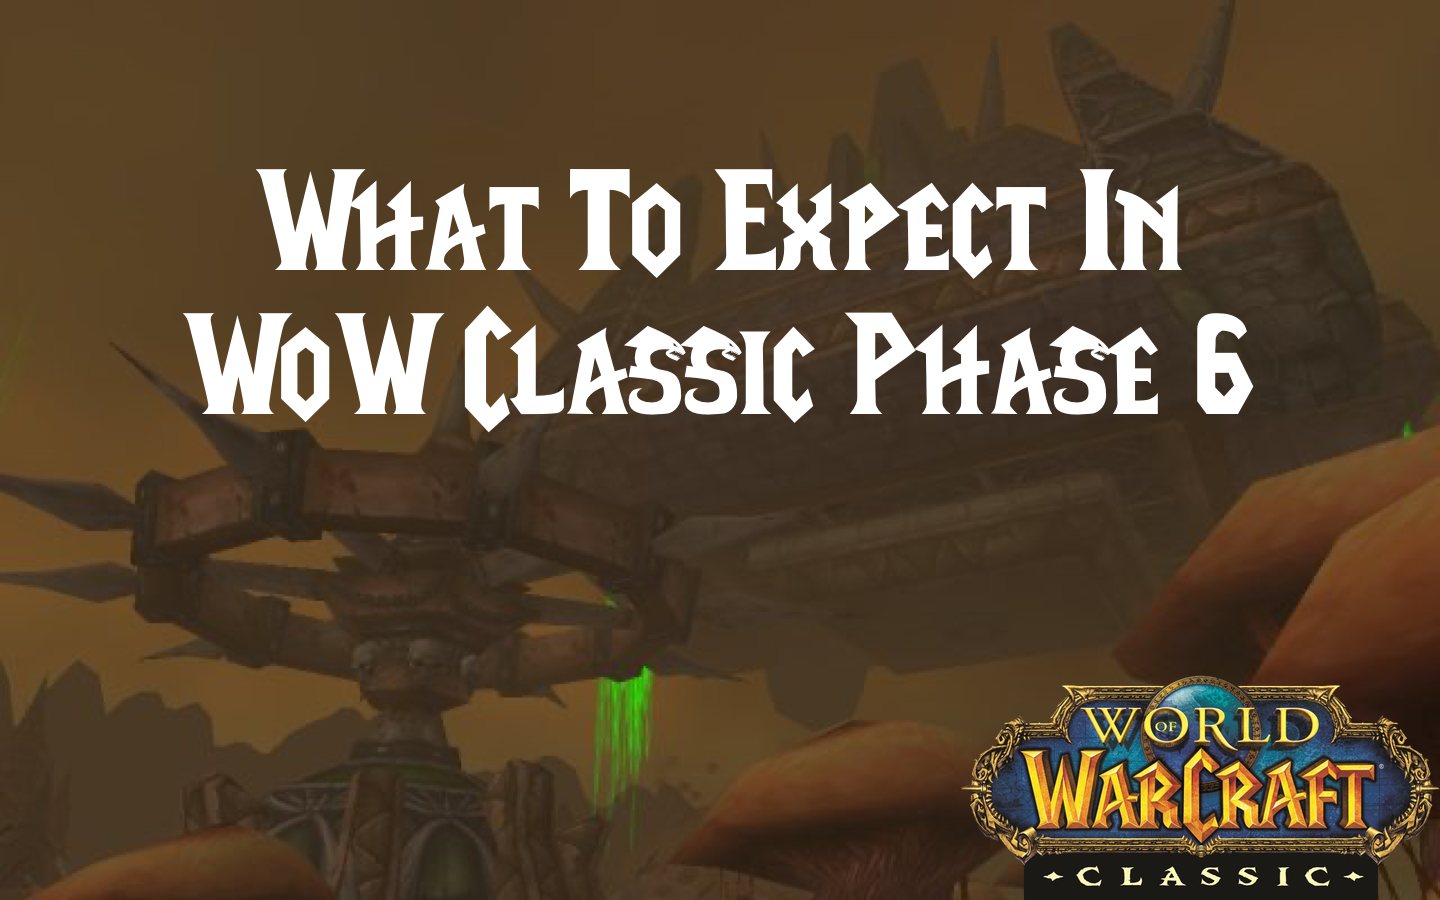 What To Expect In WoW Classic Phase 6 - Bitt's Guides